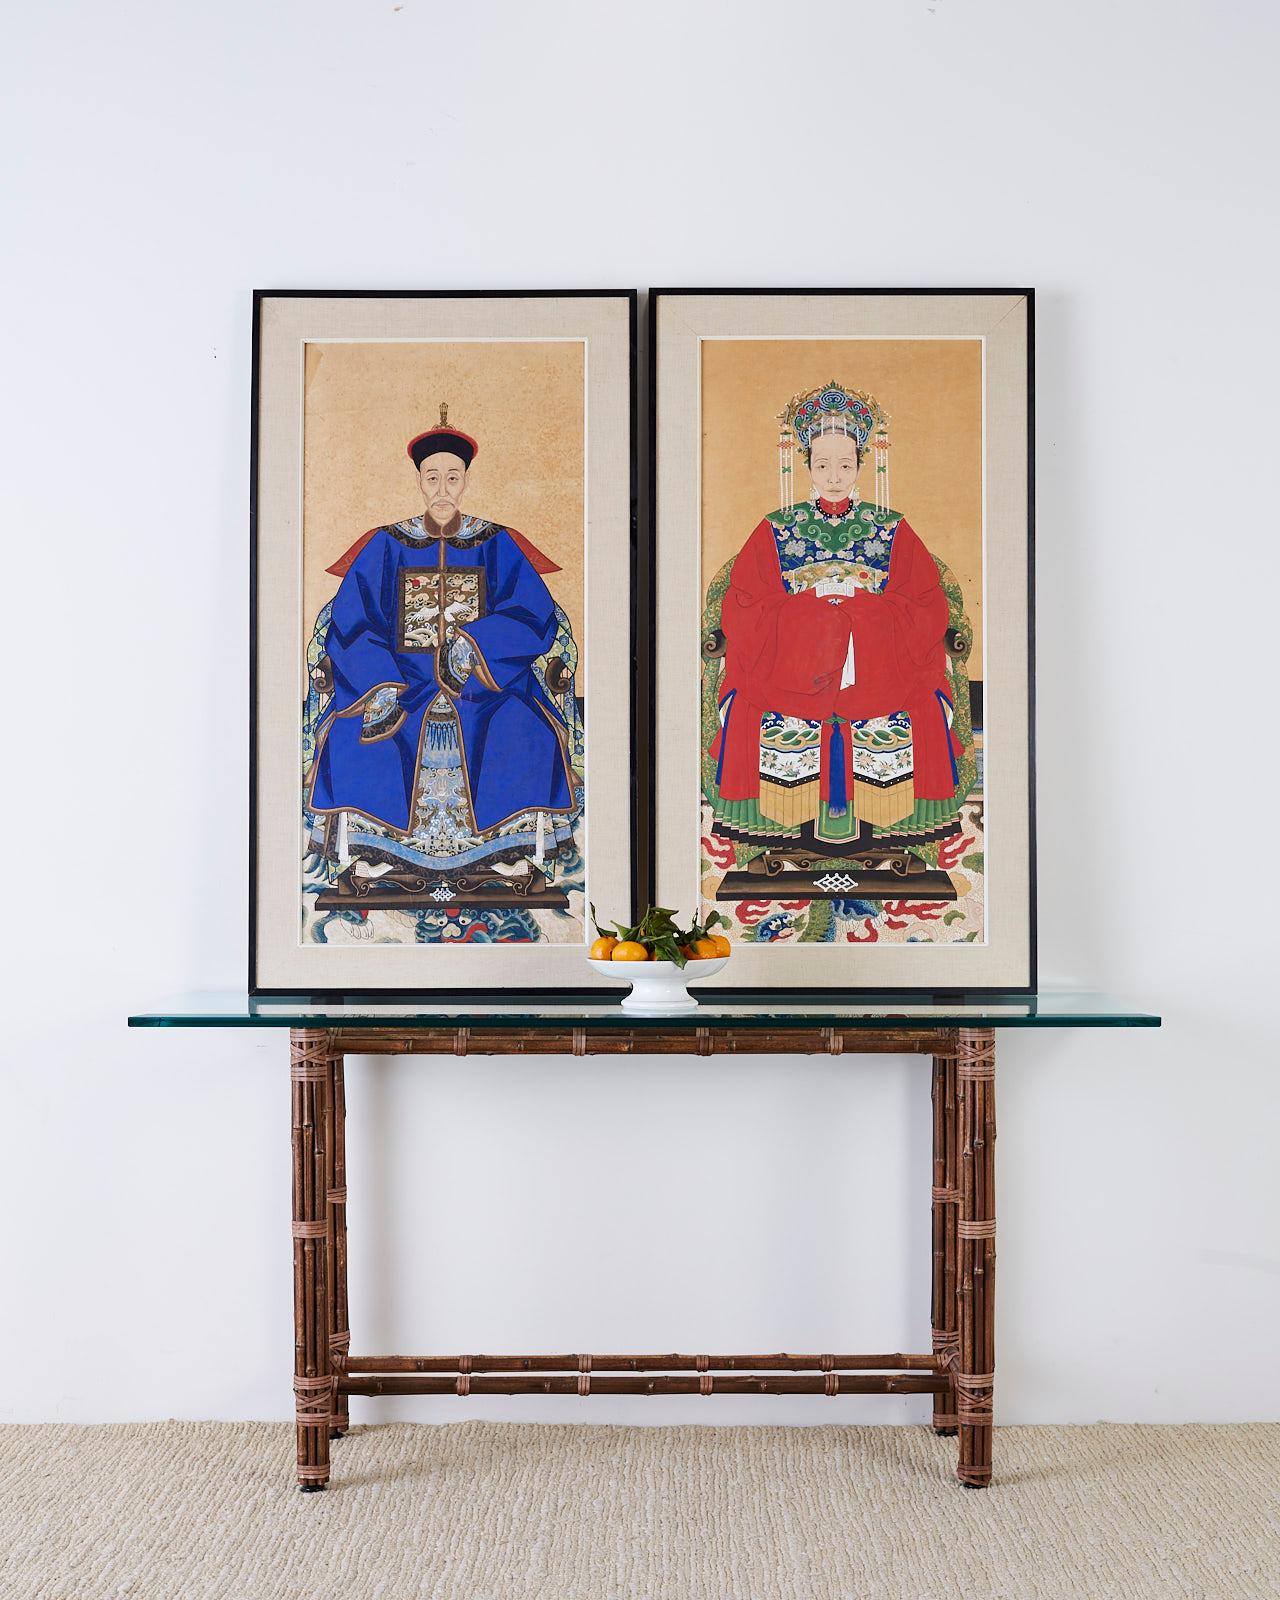 Colorful pair of Chinese ancestor portraits depicting a patriarch and matriarch of high ranking official status. Both seated wearing beautifully decorated robes and hats. Mounted in ebonized wood frames with linen borders. From an estate in San